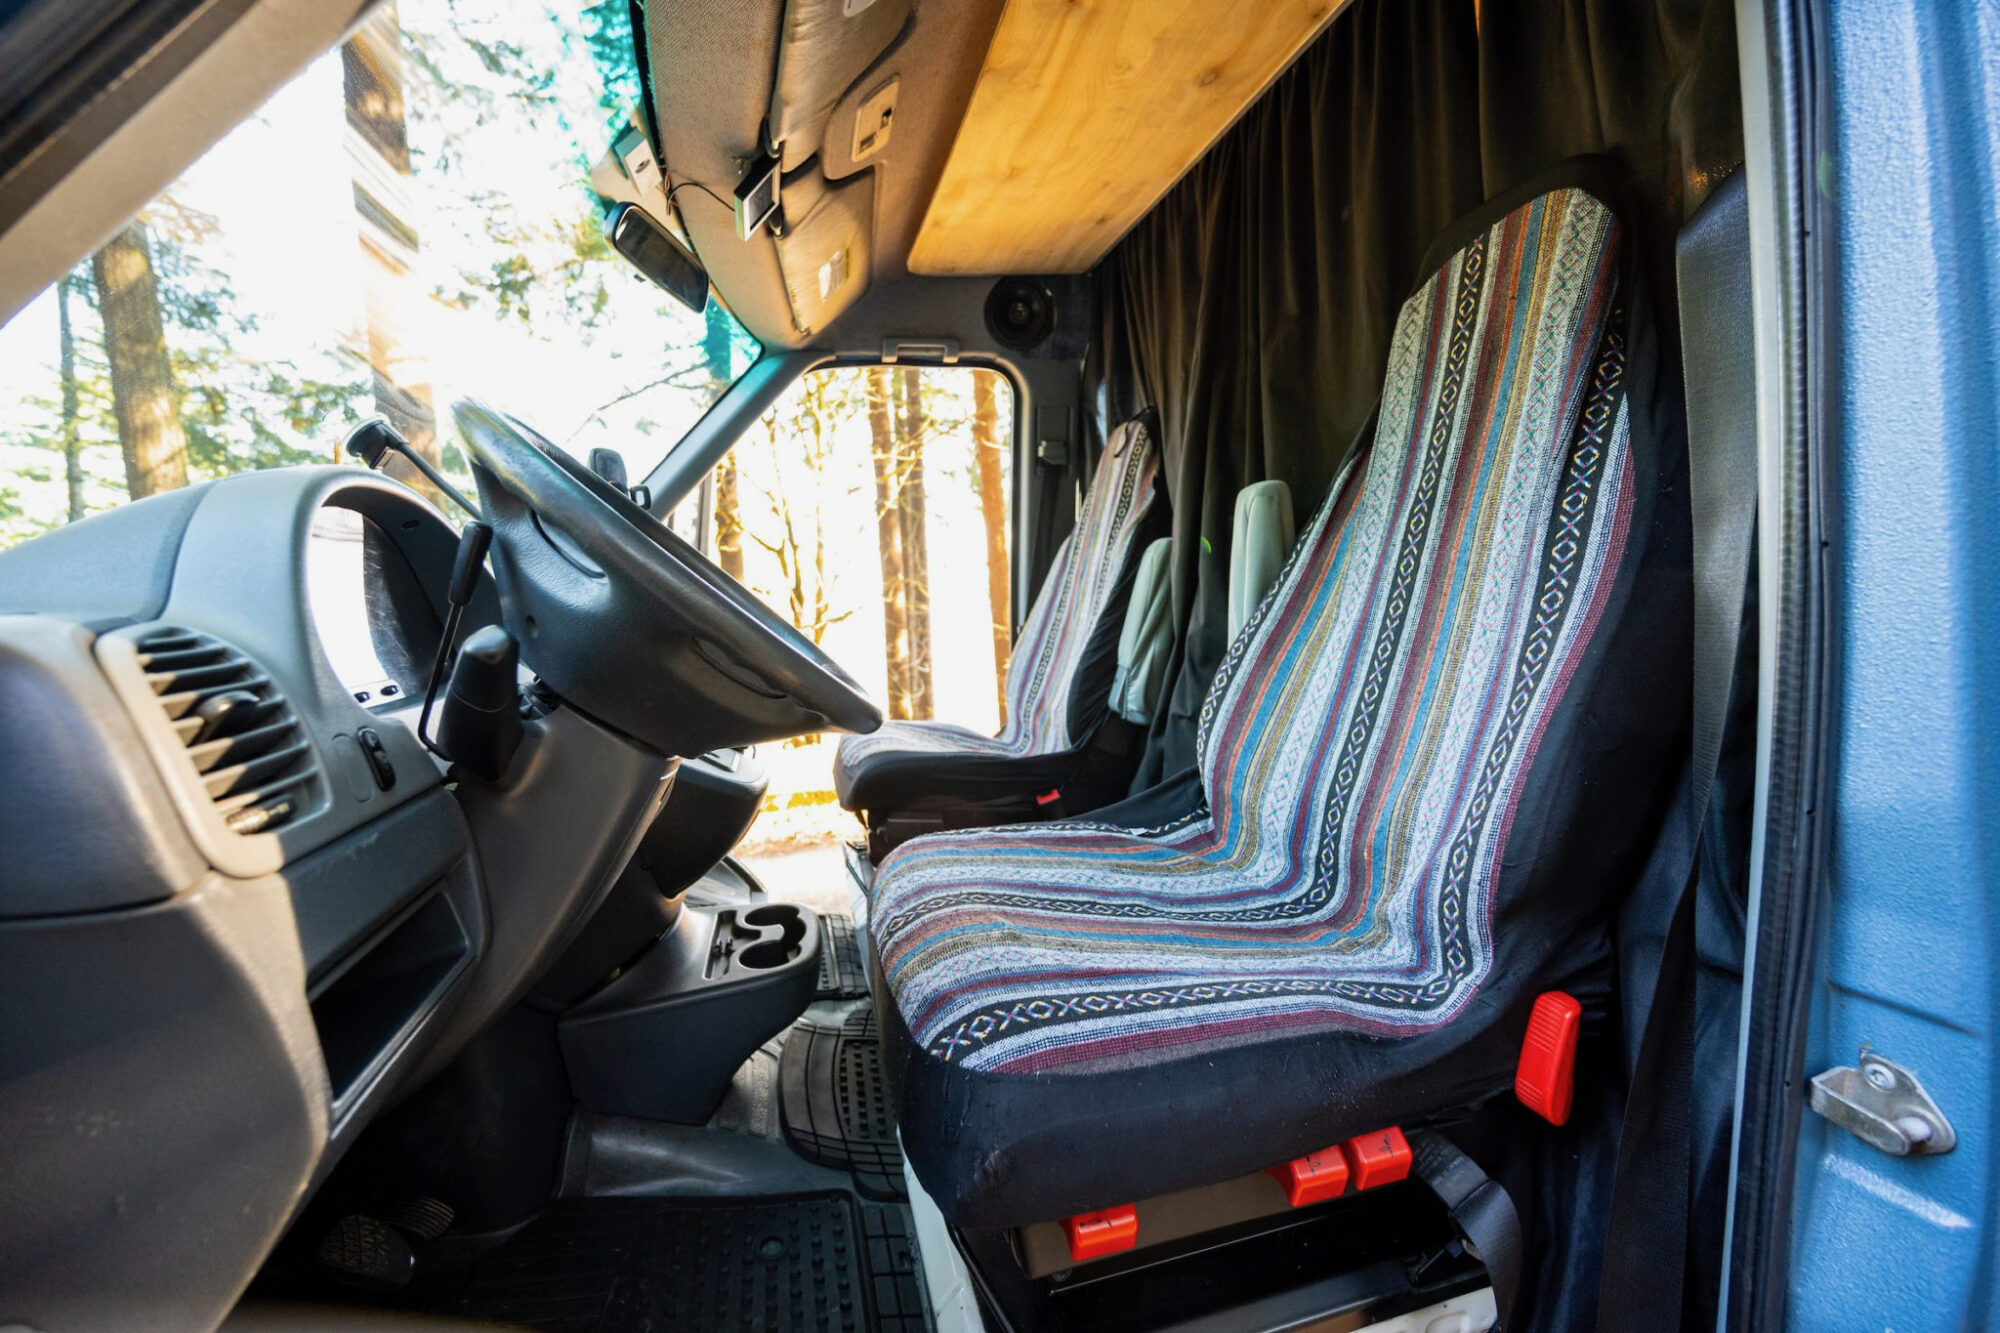 Driver's seat and passenger seat in a converted van, featuring custom patterned upholstery that adds a personal touch to the vehicle's interior.